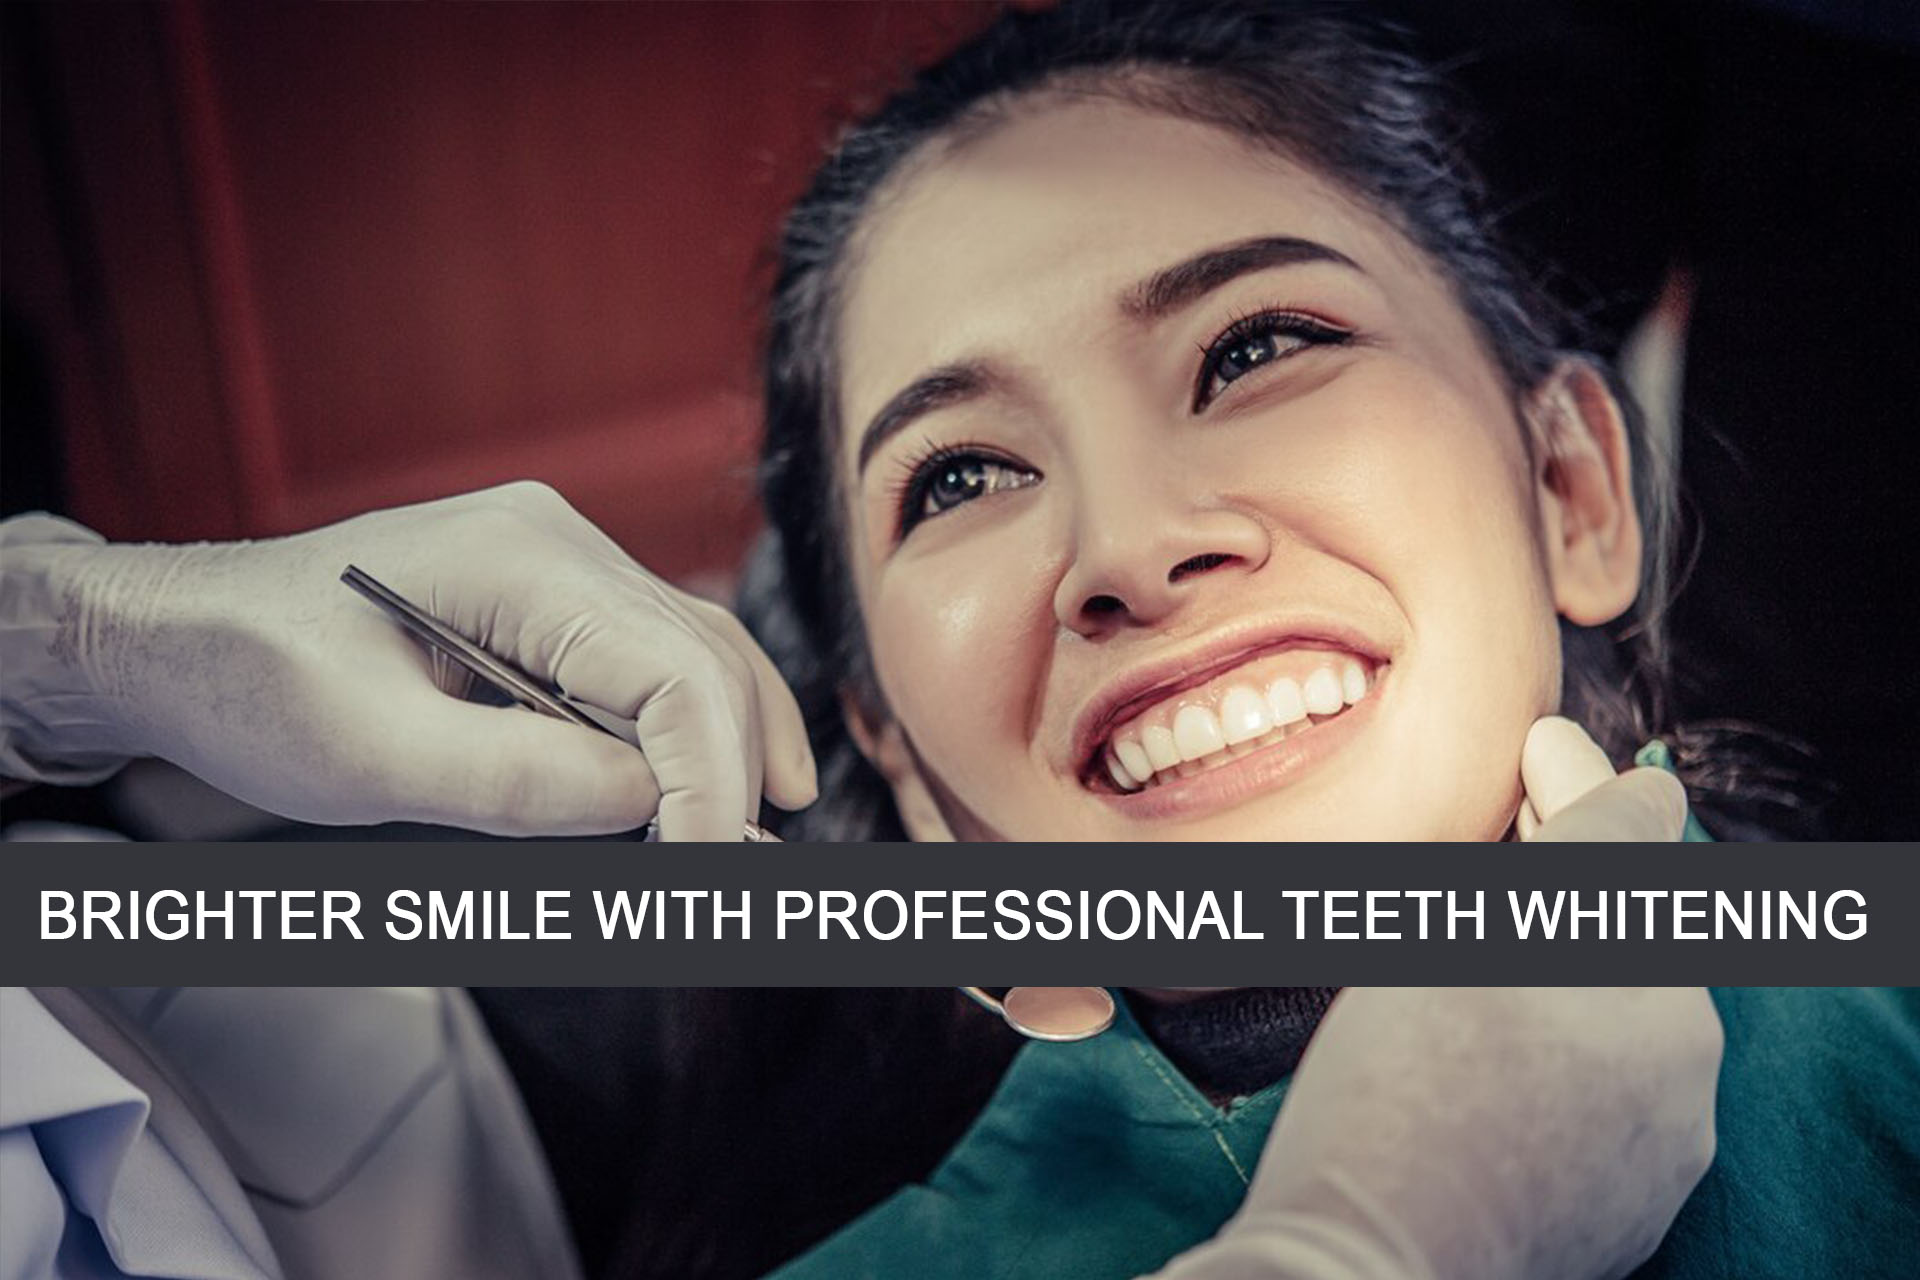 righter Smile with Professional Teeth Whitening